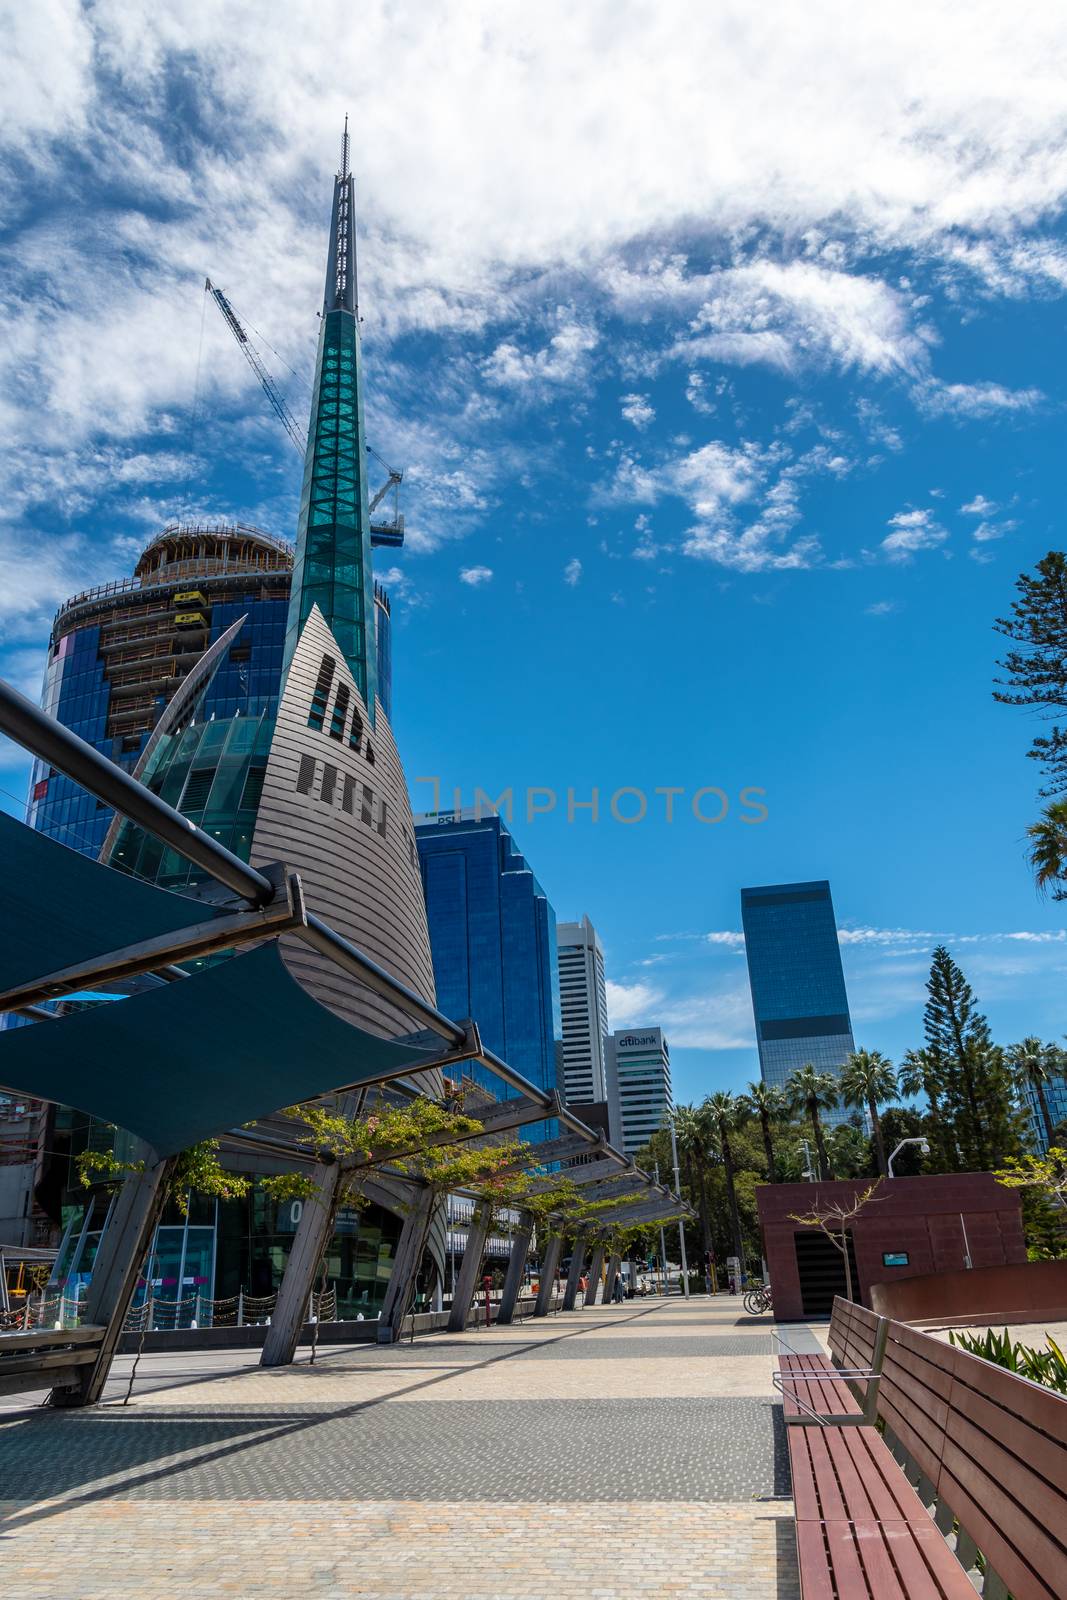 The Bell Tower at Elizabeth Quay in Perth, Western Australia by MXW_Stock